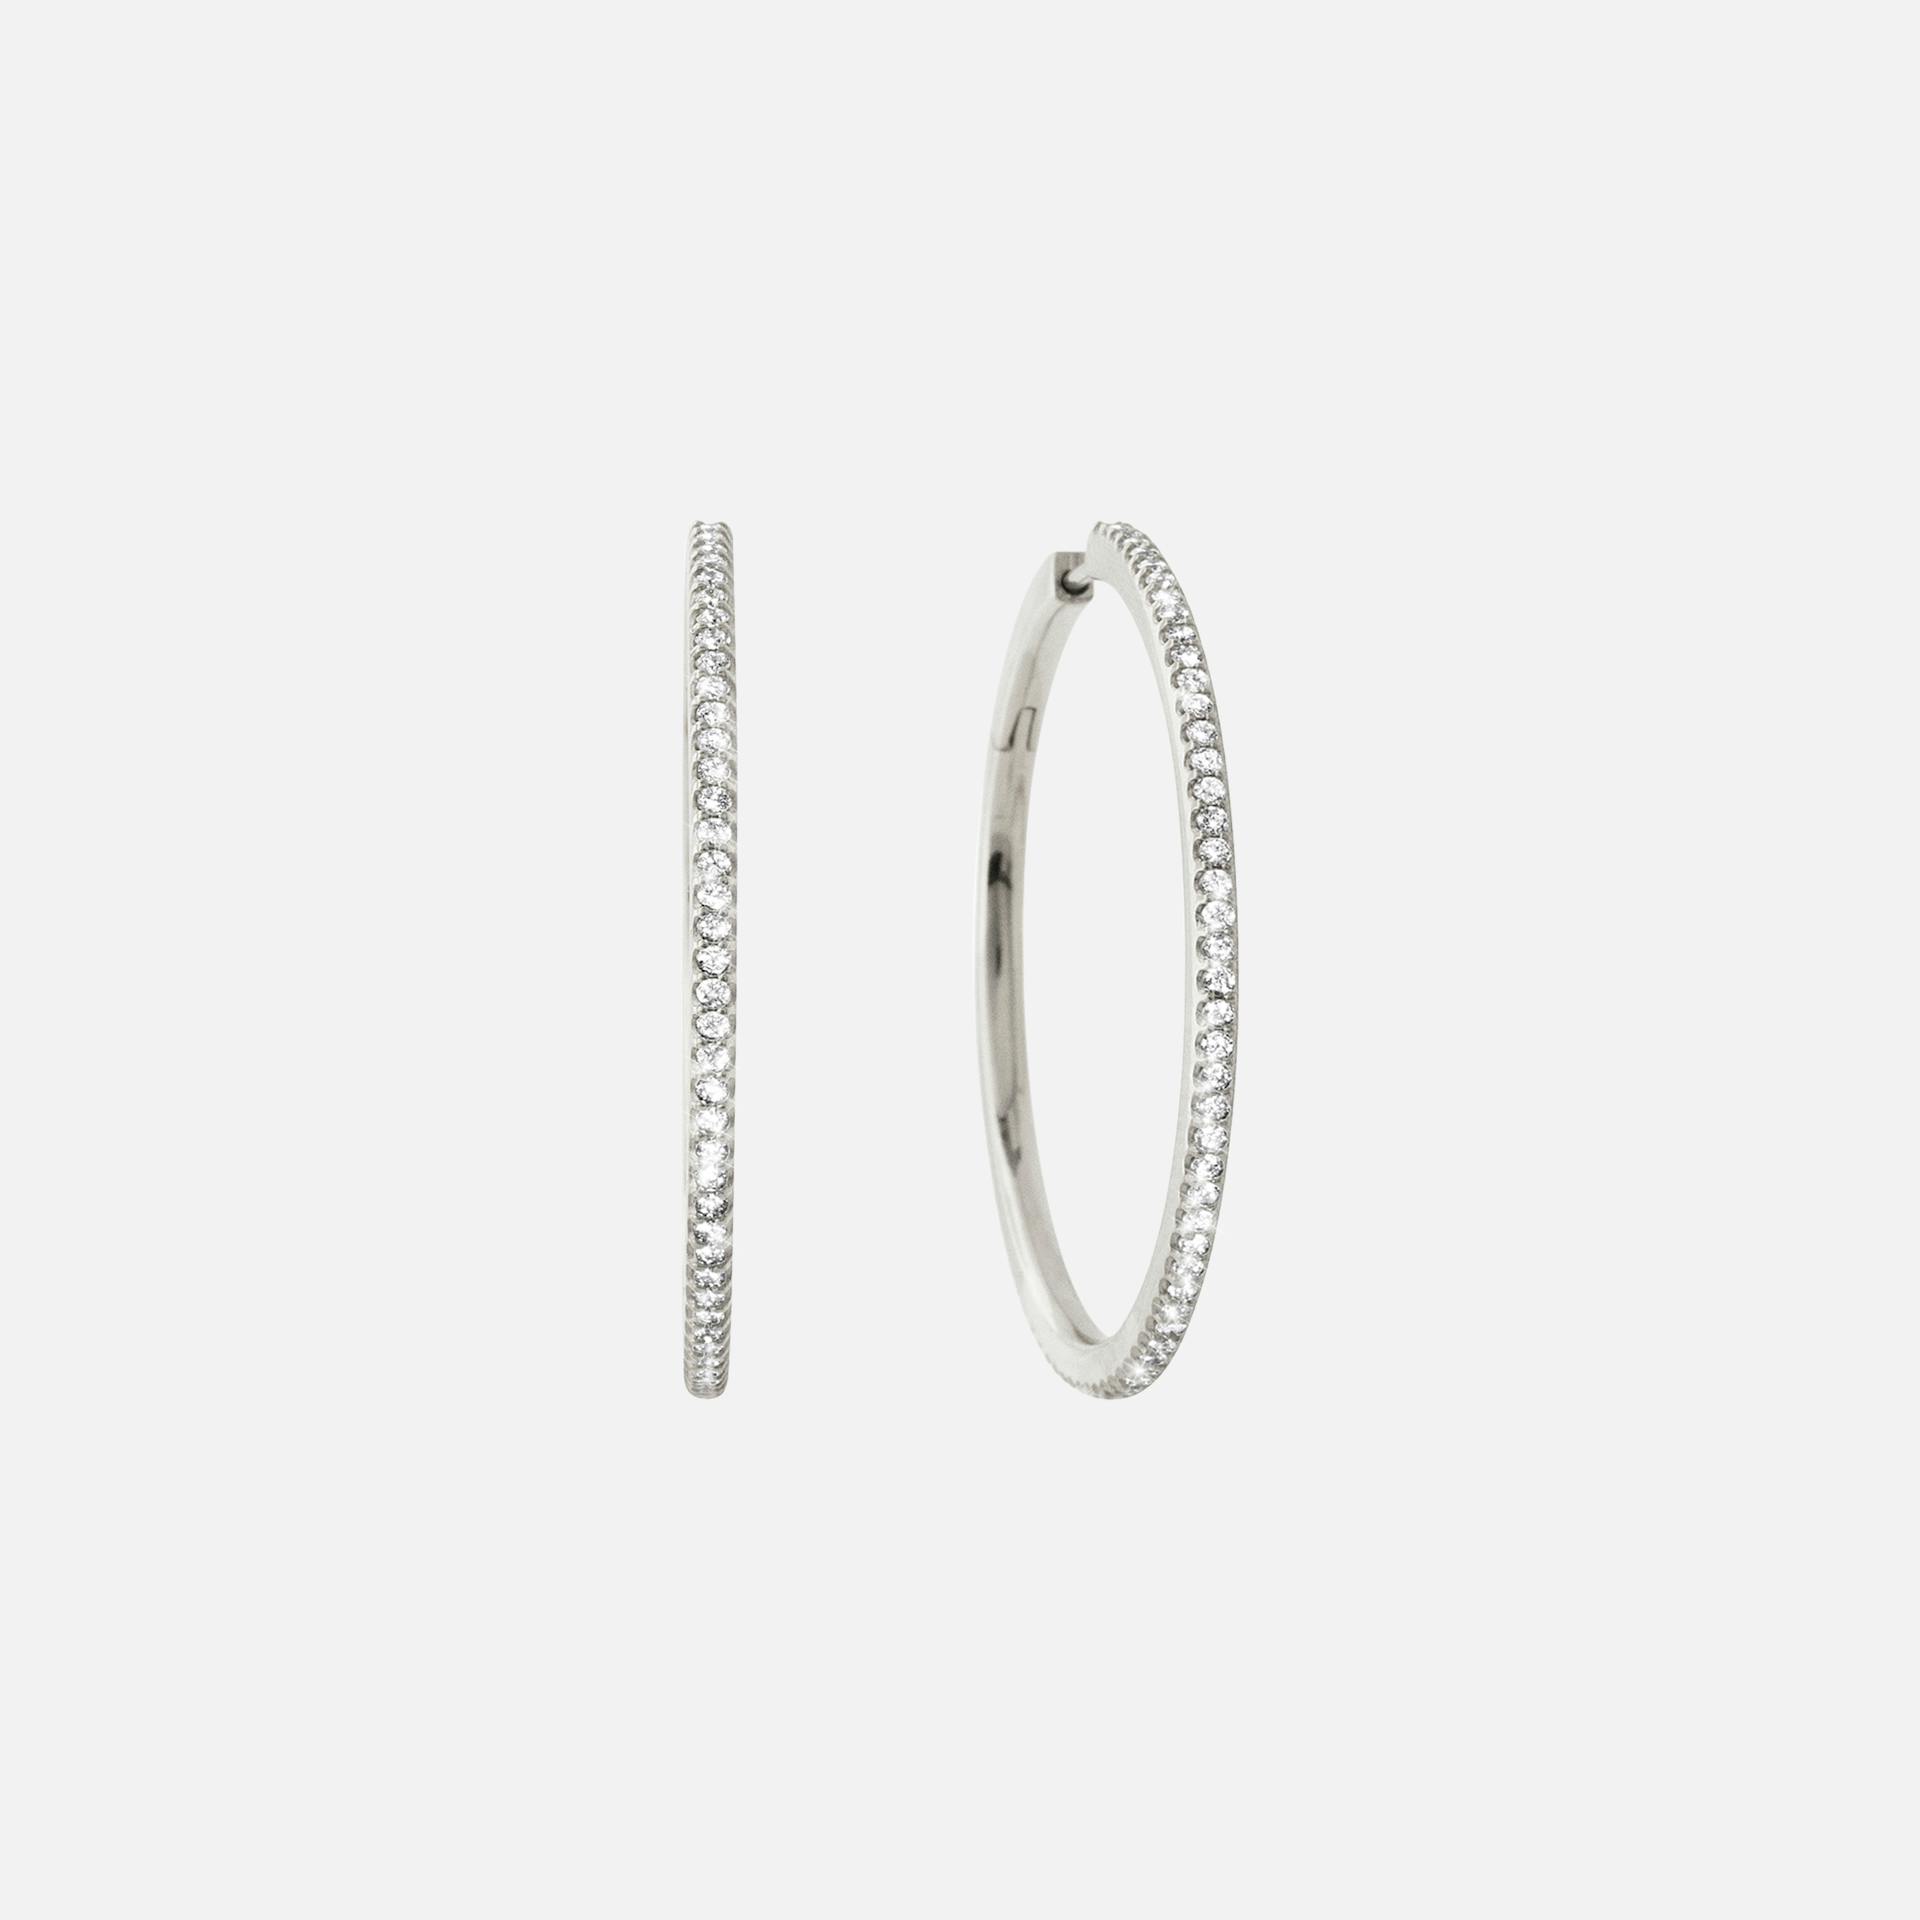 Love Bands Creol Earrings Large in White Gold with Diamonds  |  Ole Lynggaard Copenhagen